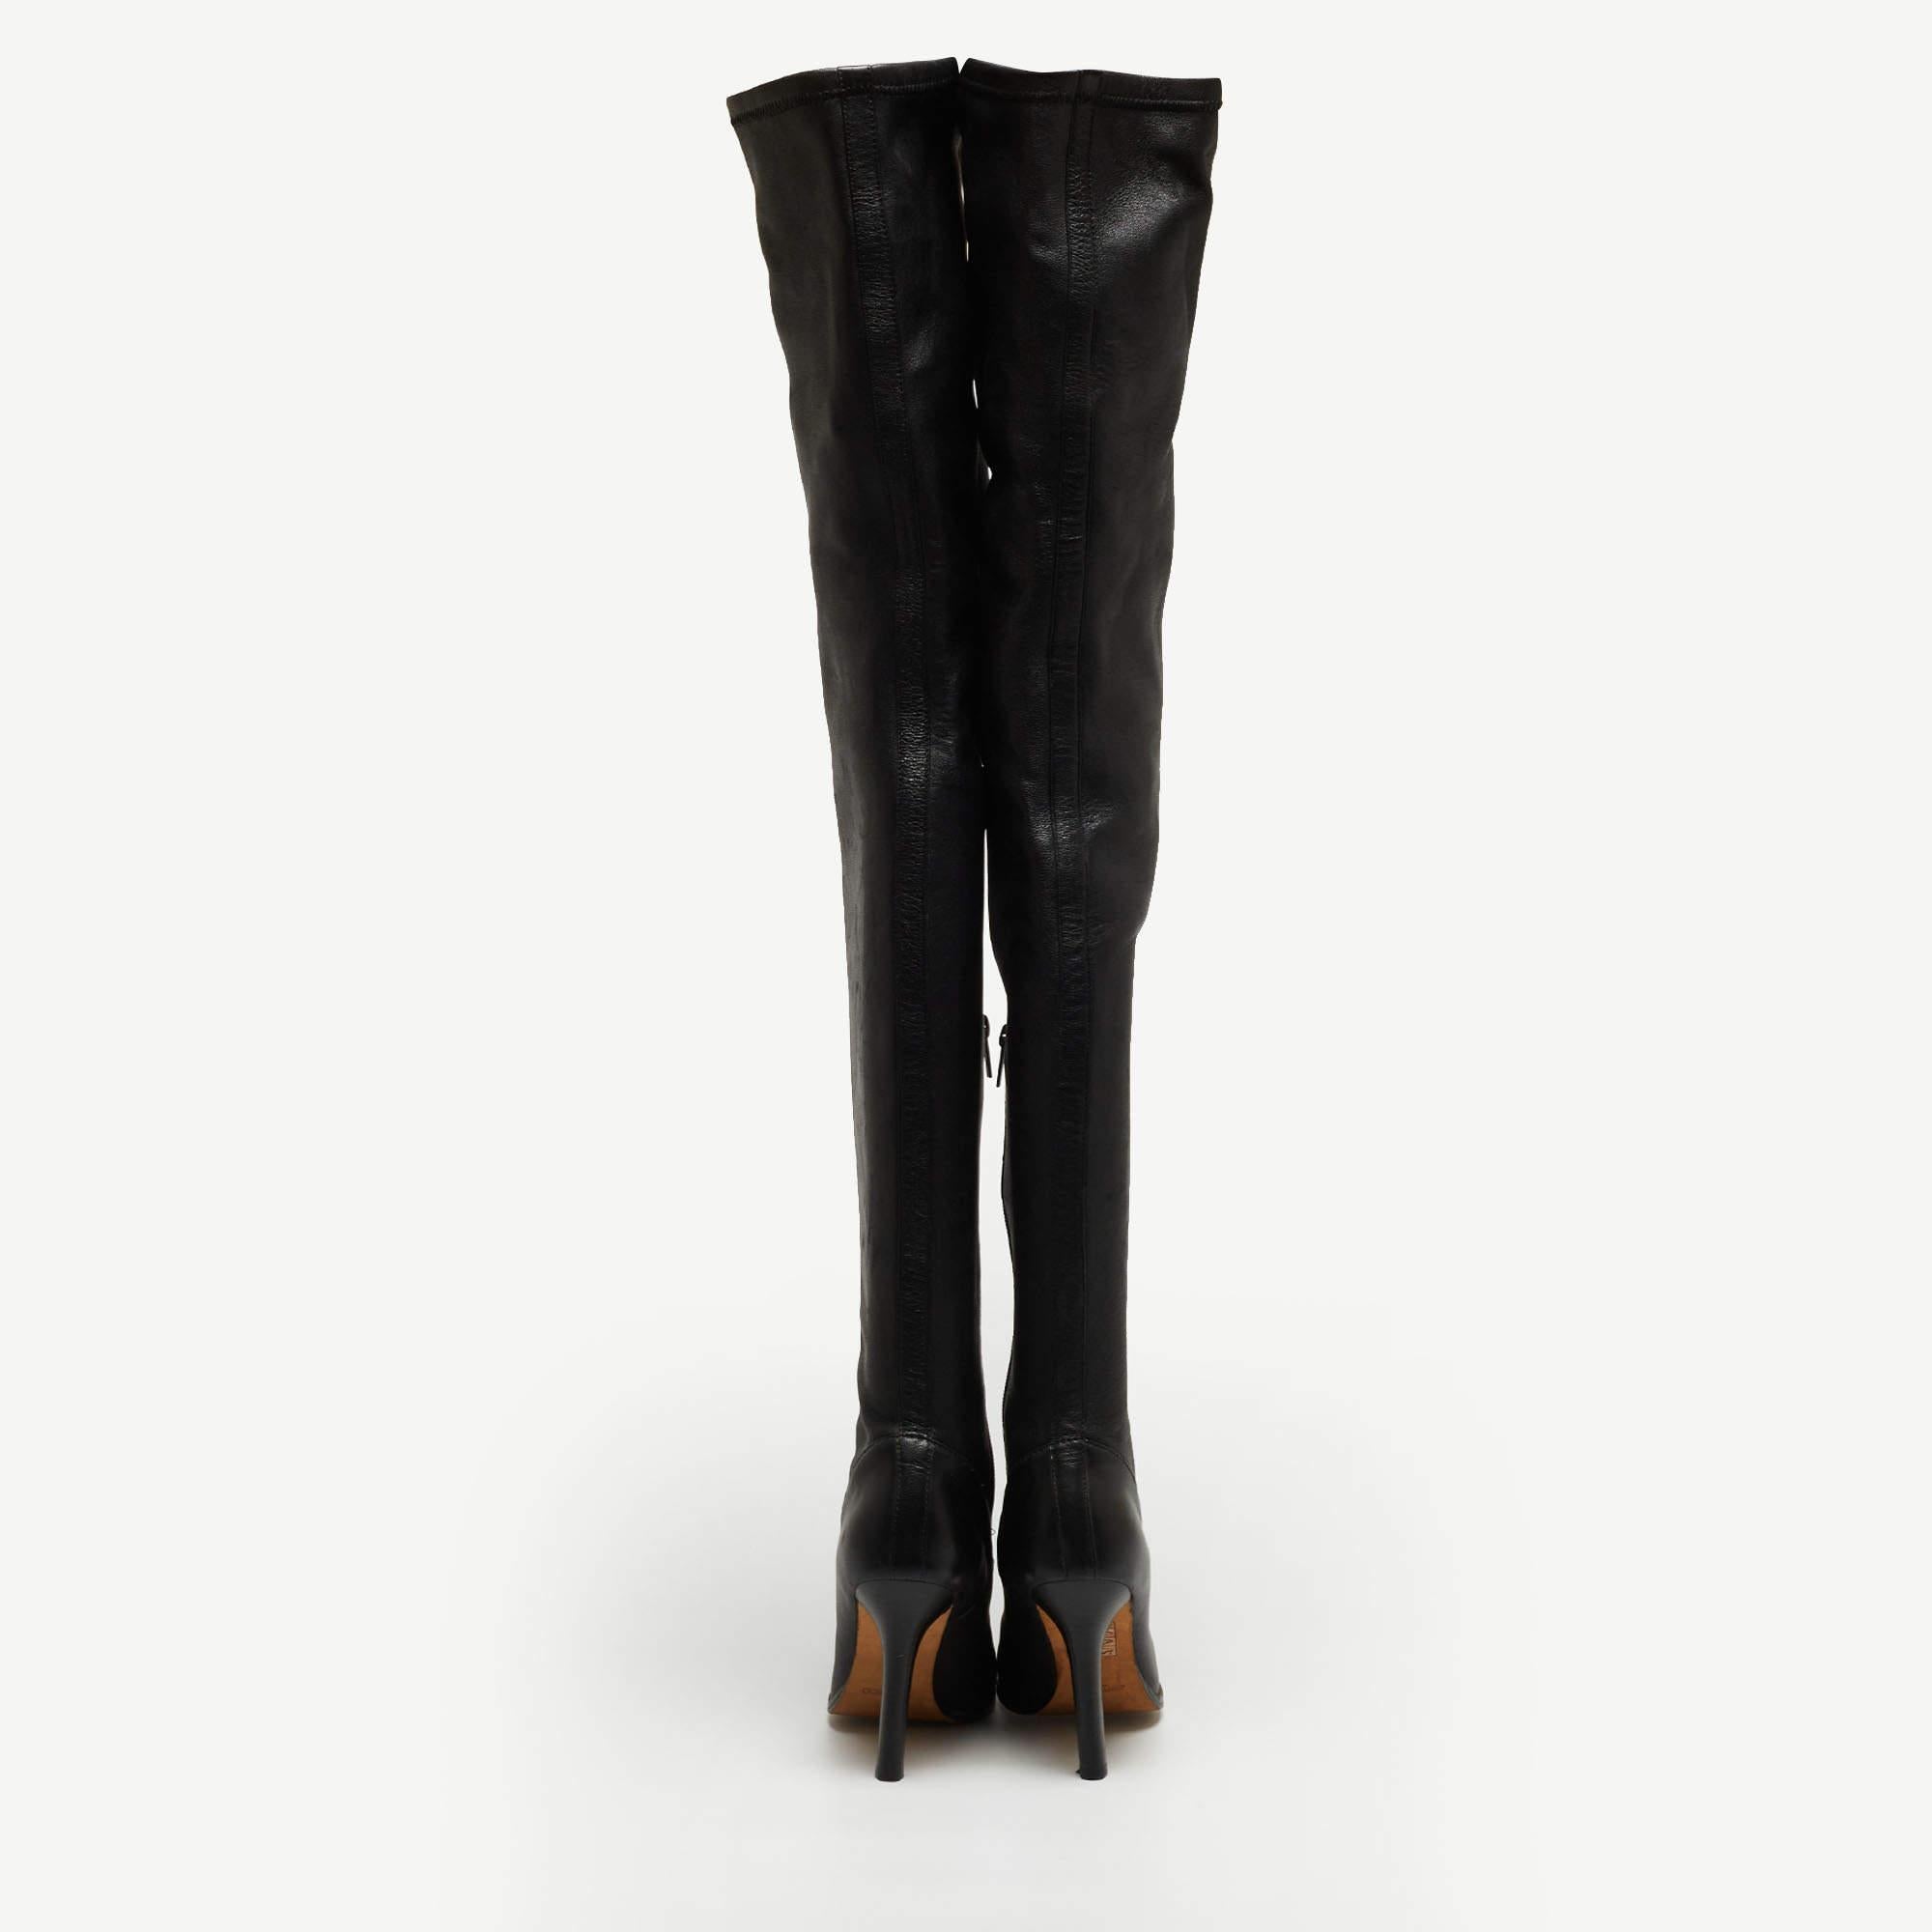 Jimmy Choo's Black Leather Thigh-High Boots exude sophistication and high fashion, a versatile and stylish addition to any wardrobe.

